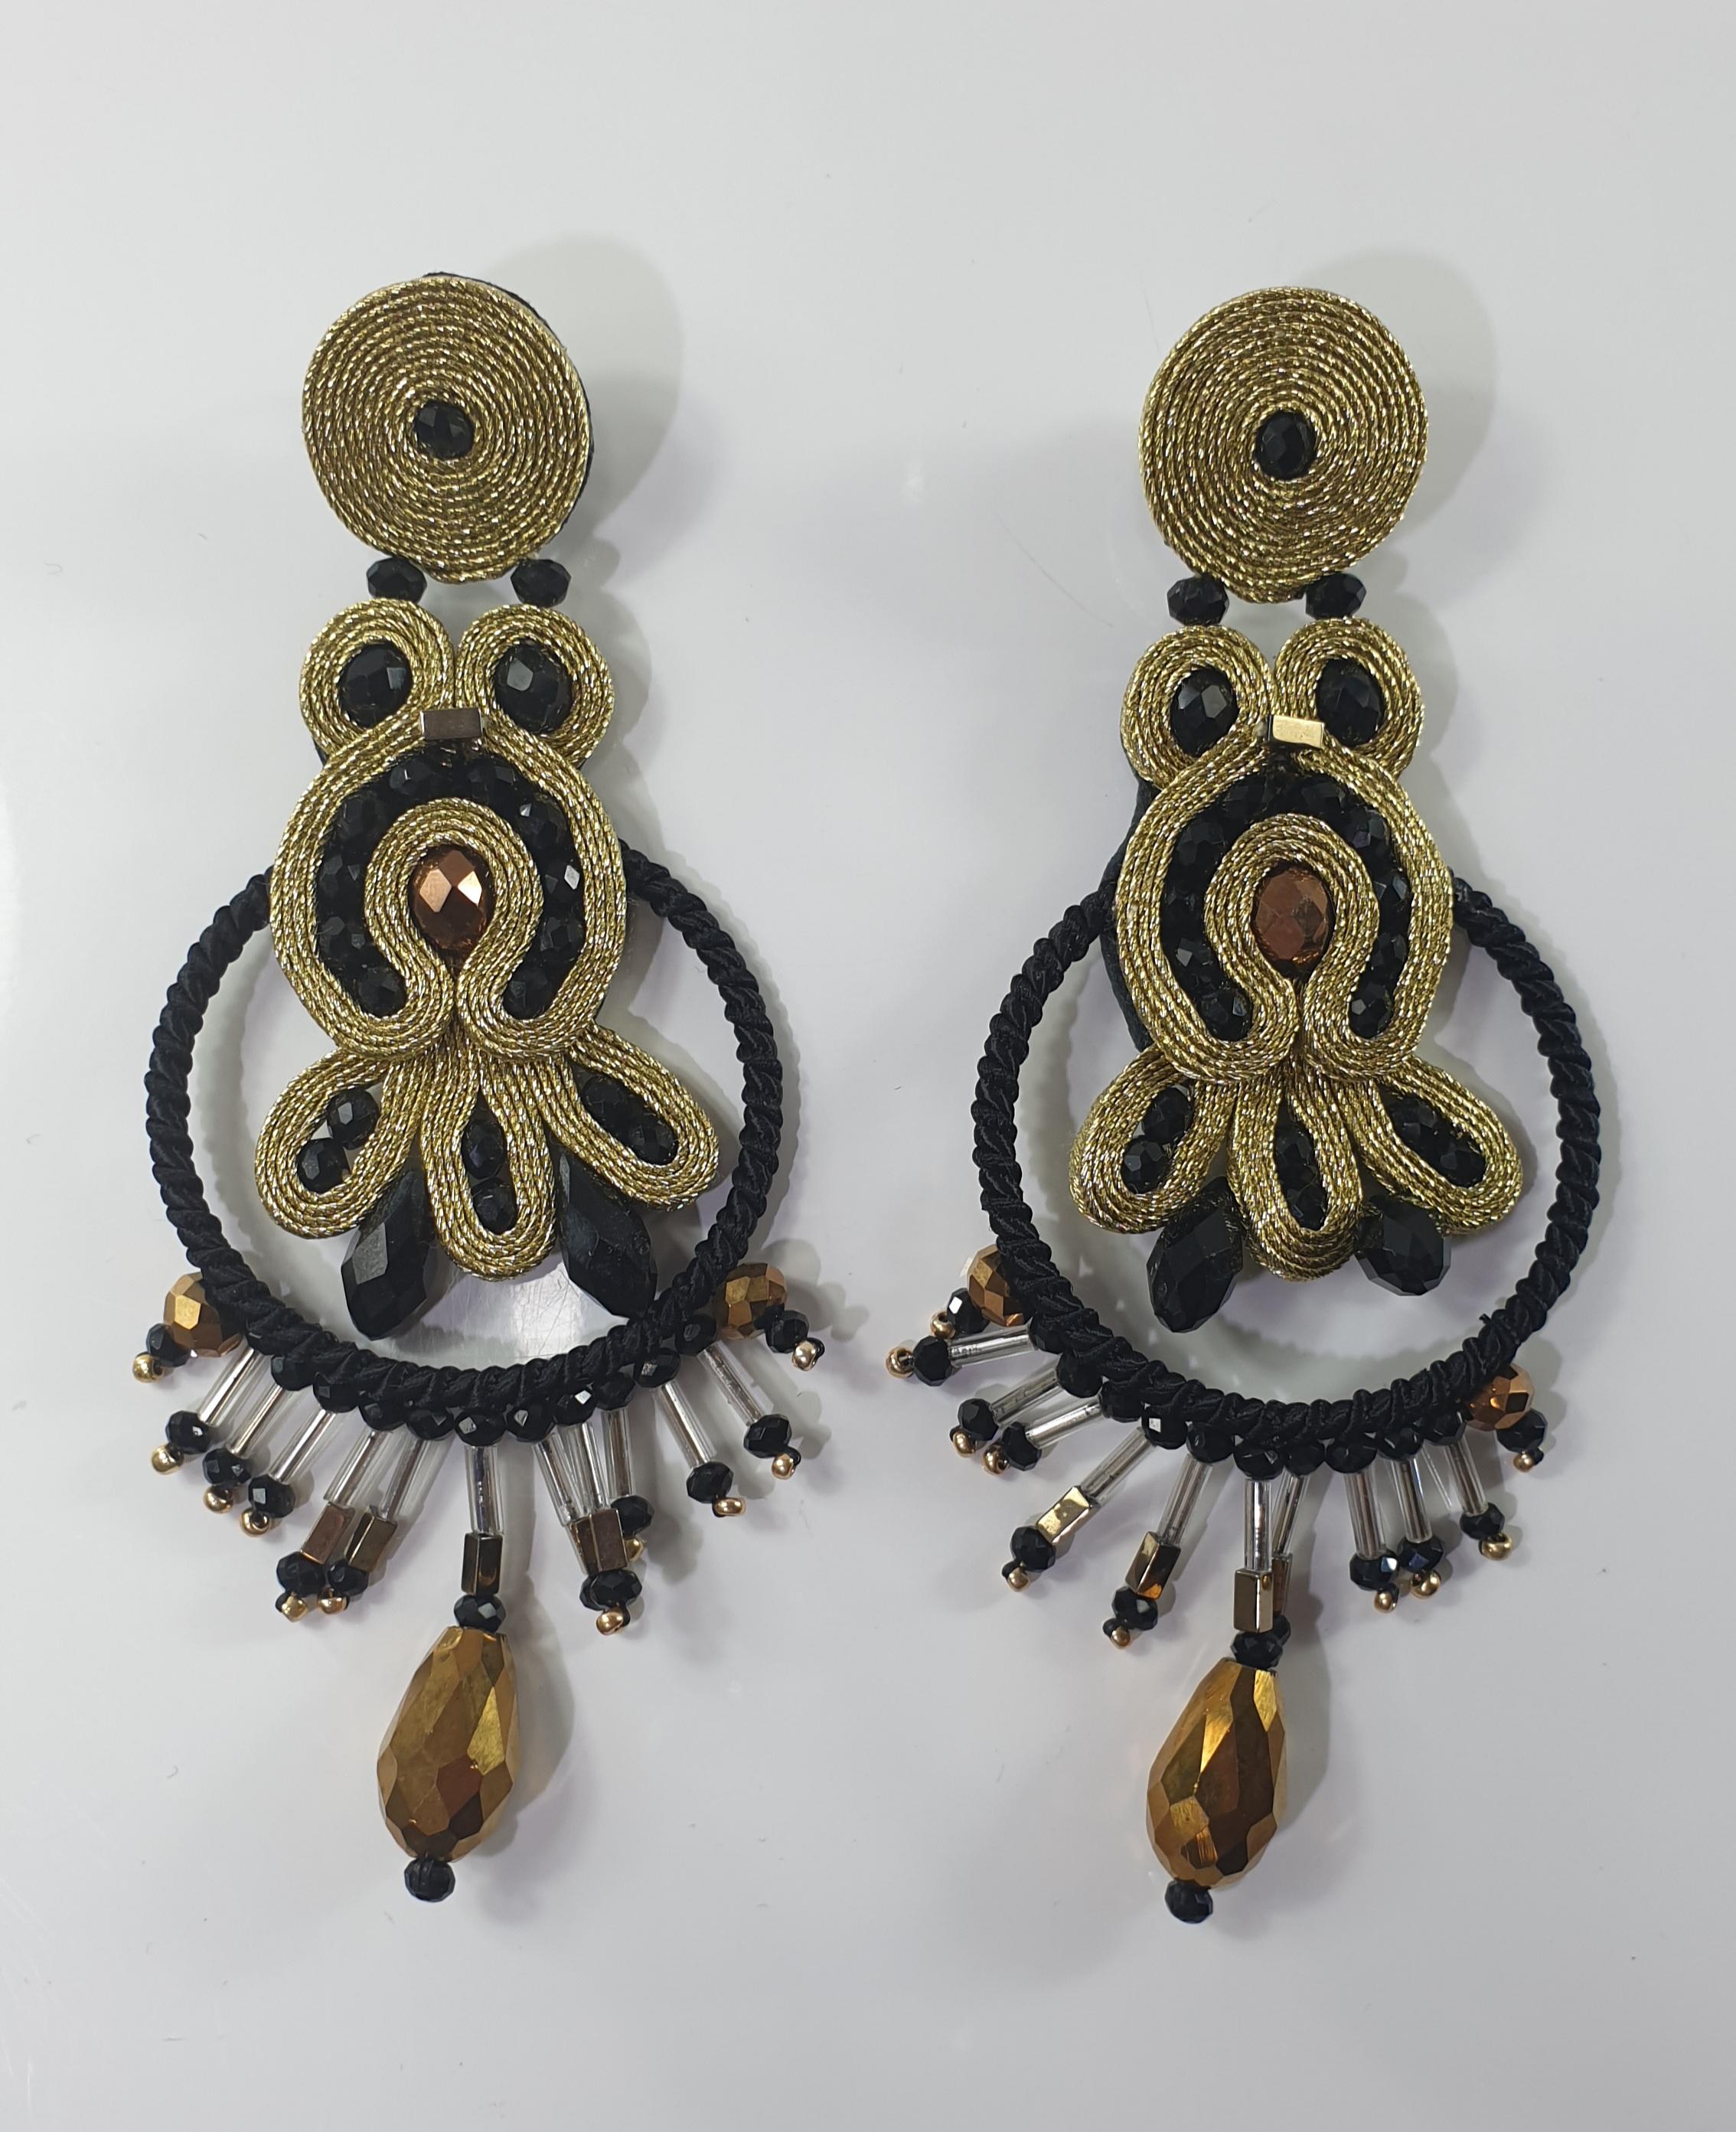 Musula Urban Golden Opera Earrings
Urban Collection is a special homage to sweet lovers.
Soutache earrings made with rayon 2mm, hematites and crystal beads. 
Silver clips lenght 10cm 3.94inches. 
Back finish in natural smooth and thin